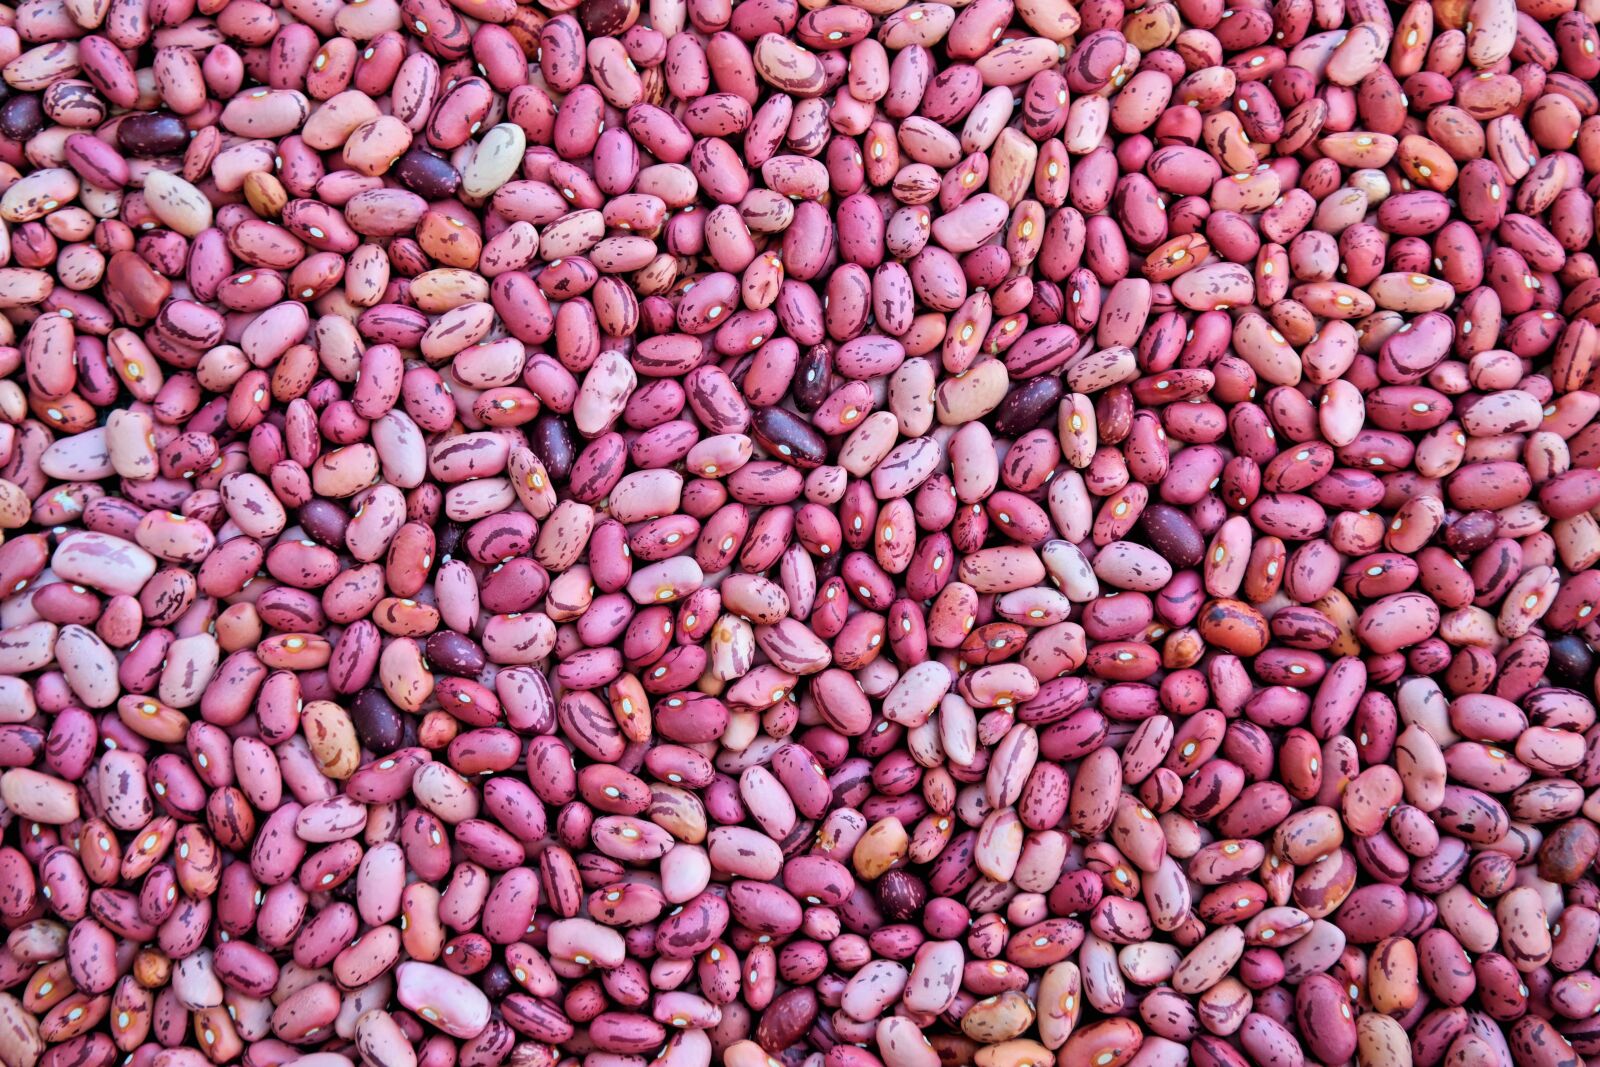 NX 18-55mm F3.5-5.6 sample photo. Legumes, beans, food photography